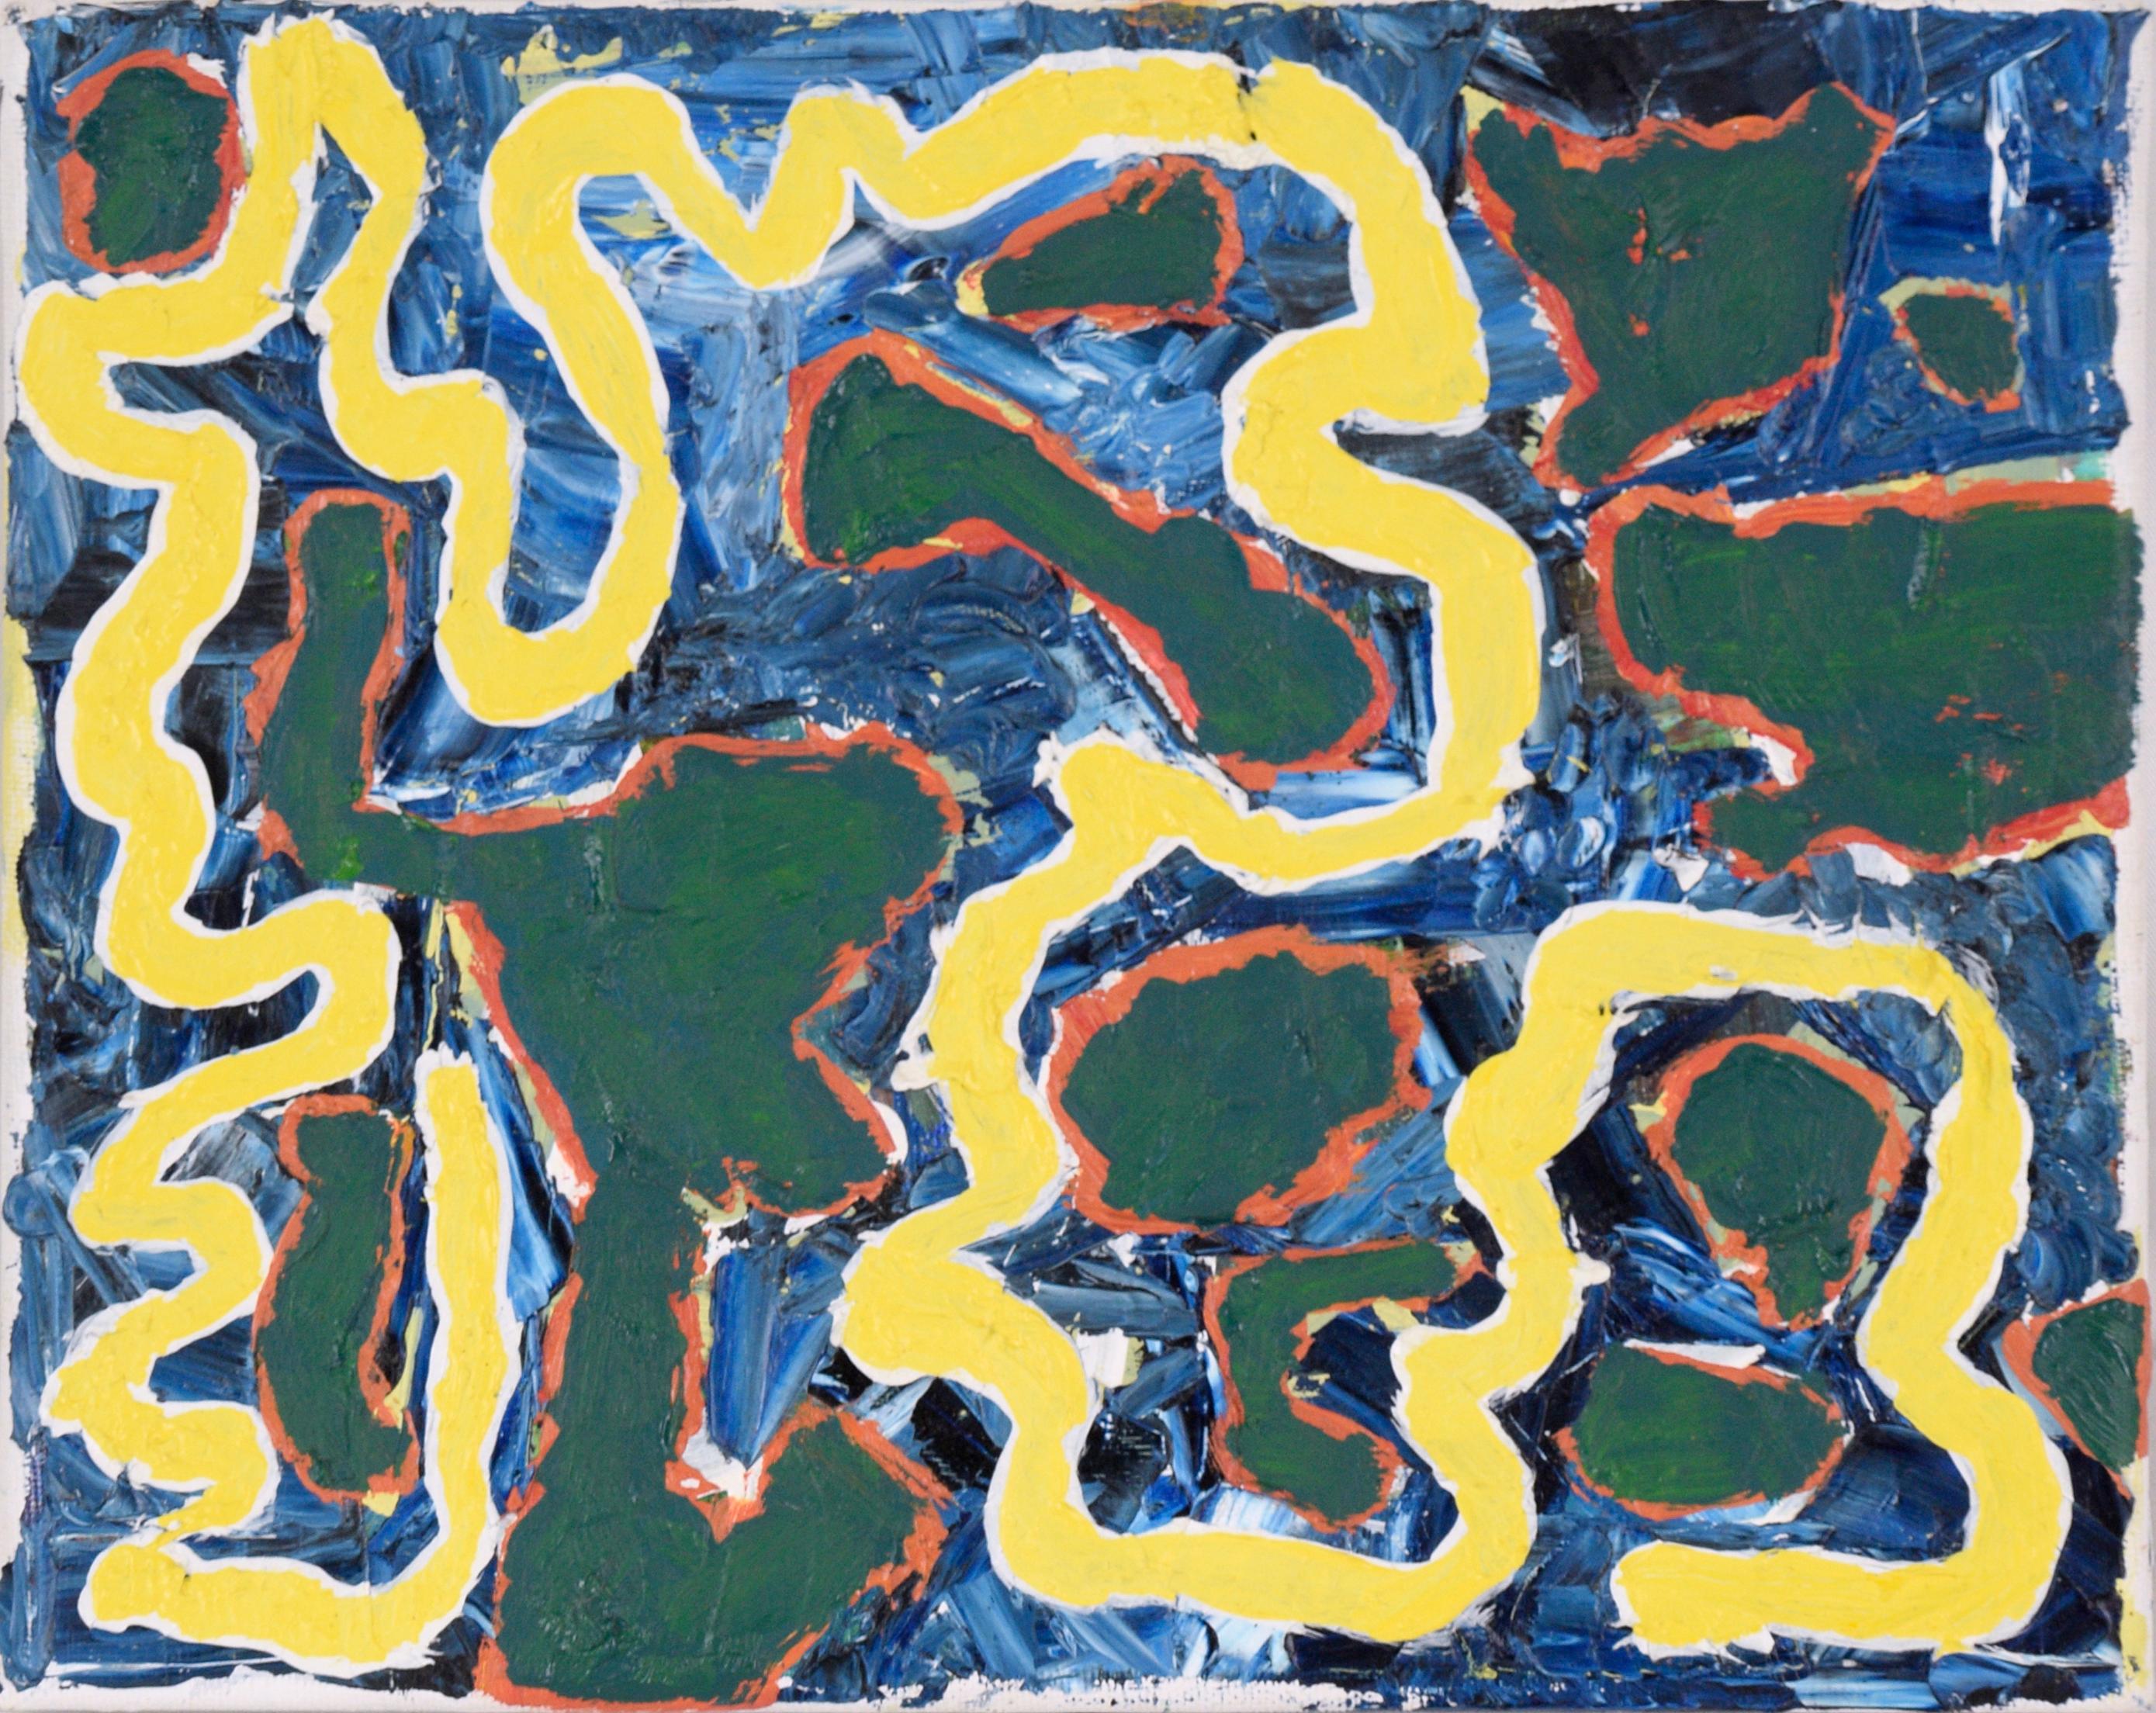 Devon Brockopp-Hammer Abstract Painting - "Patches and a Path" - Abstract Composition in Oil on Canvas